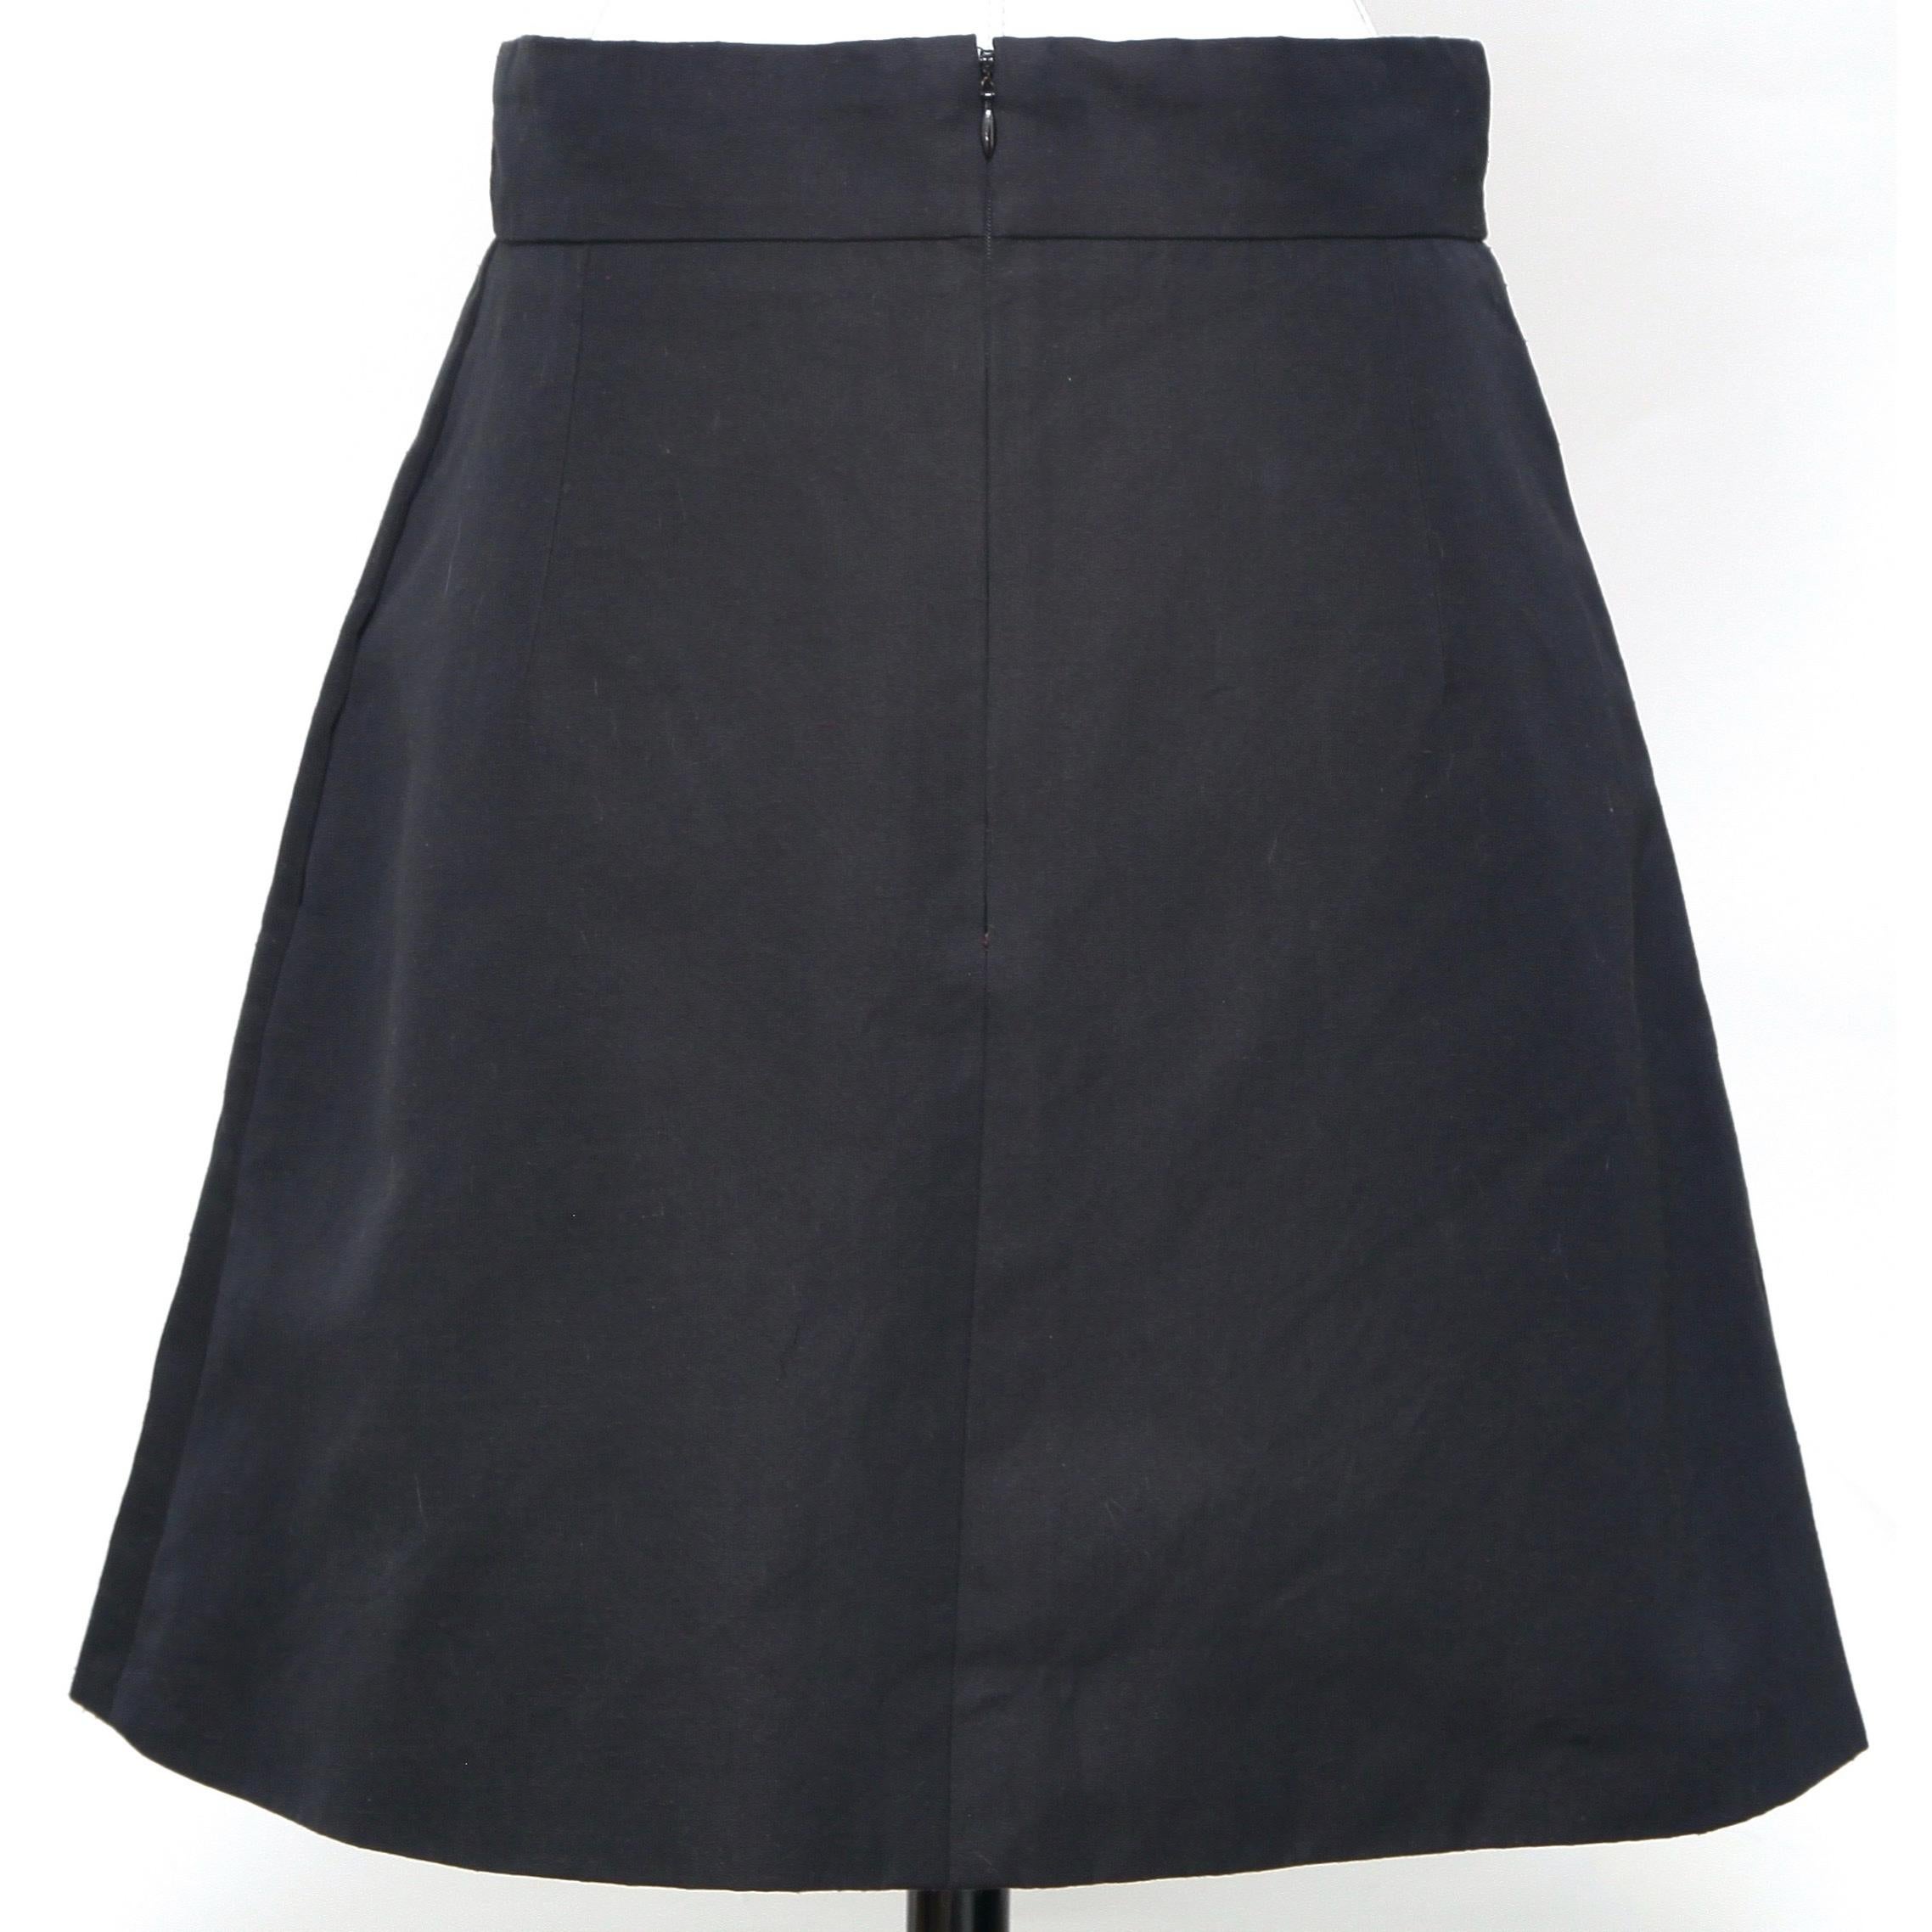 CHLOE Skirt A-Line Black Cotton Clothing Dress Pleated Buttons Sz 42 2007 In Excellent Condition For Sale In Hollywood, FL